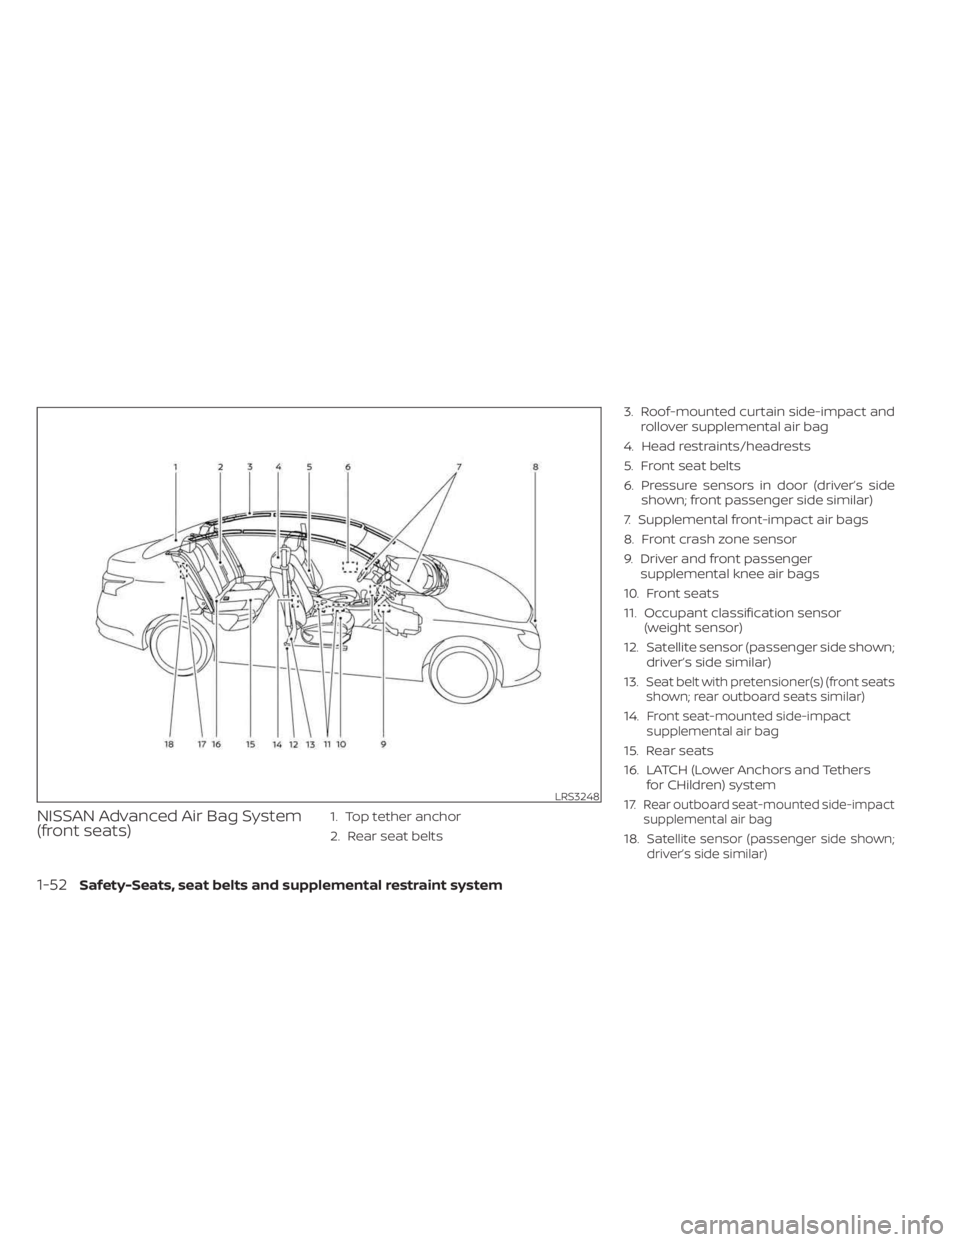 NISSAN SENTRA 2023  Owners Manual NISSAN Advanced Air Bag System
(front seats)1. Top tether anchor
2. Rear seat belts3. Roof-mounted curtain side-impact and
rollover supplemental air bag
4. Head restraints/headrests
5. Front seat belt